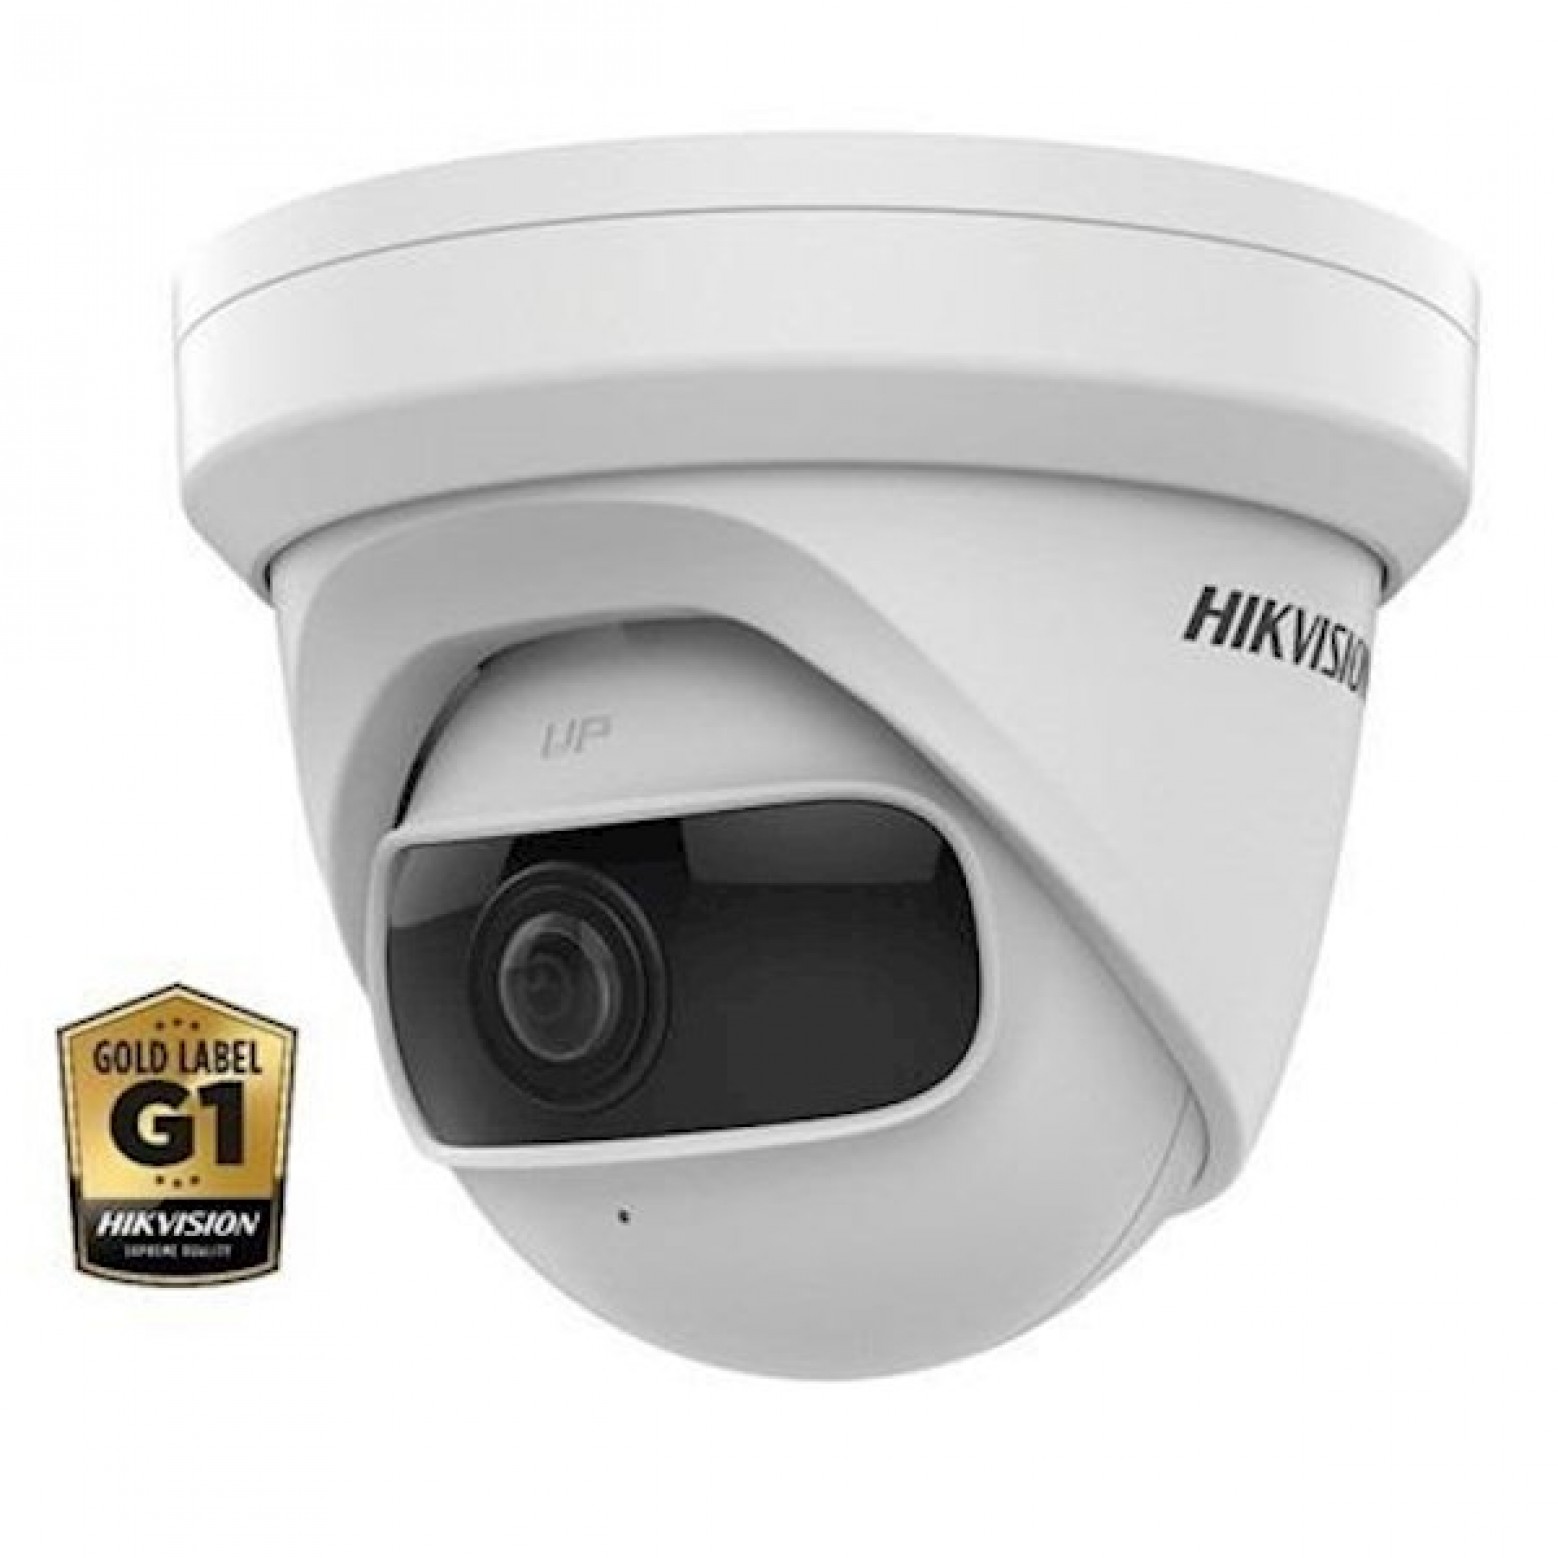 Hikvision DS-2CD2345G0P-I, 4MP, 30m IR, WDR, Ultra Low Light, 180° Dome Camera